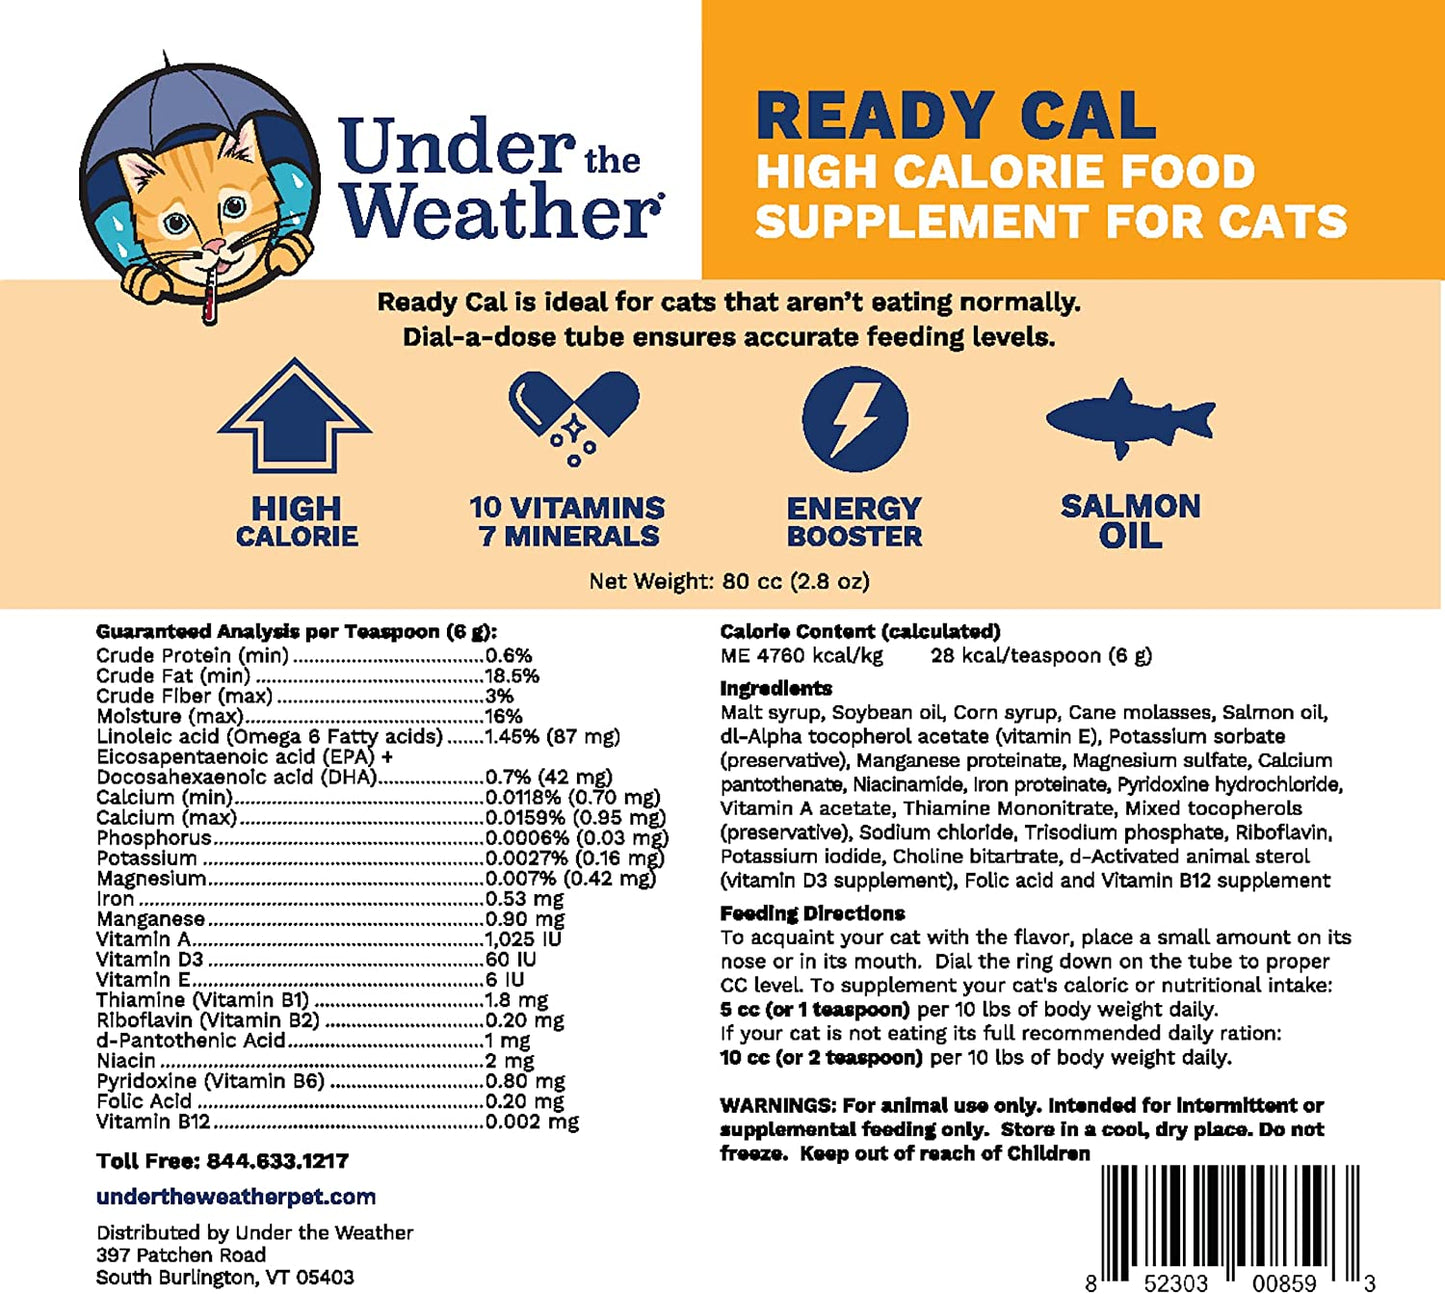 Pet | Ready Cal for Cats 100Cc | High Calorie Supplement | Cat Weight Gainer and High Calorie Booster | 10 Vitamins, 7 Minerals & Omega Fatty Acids (For Cats 100Cc)